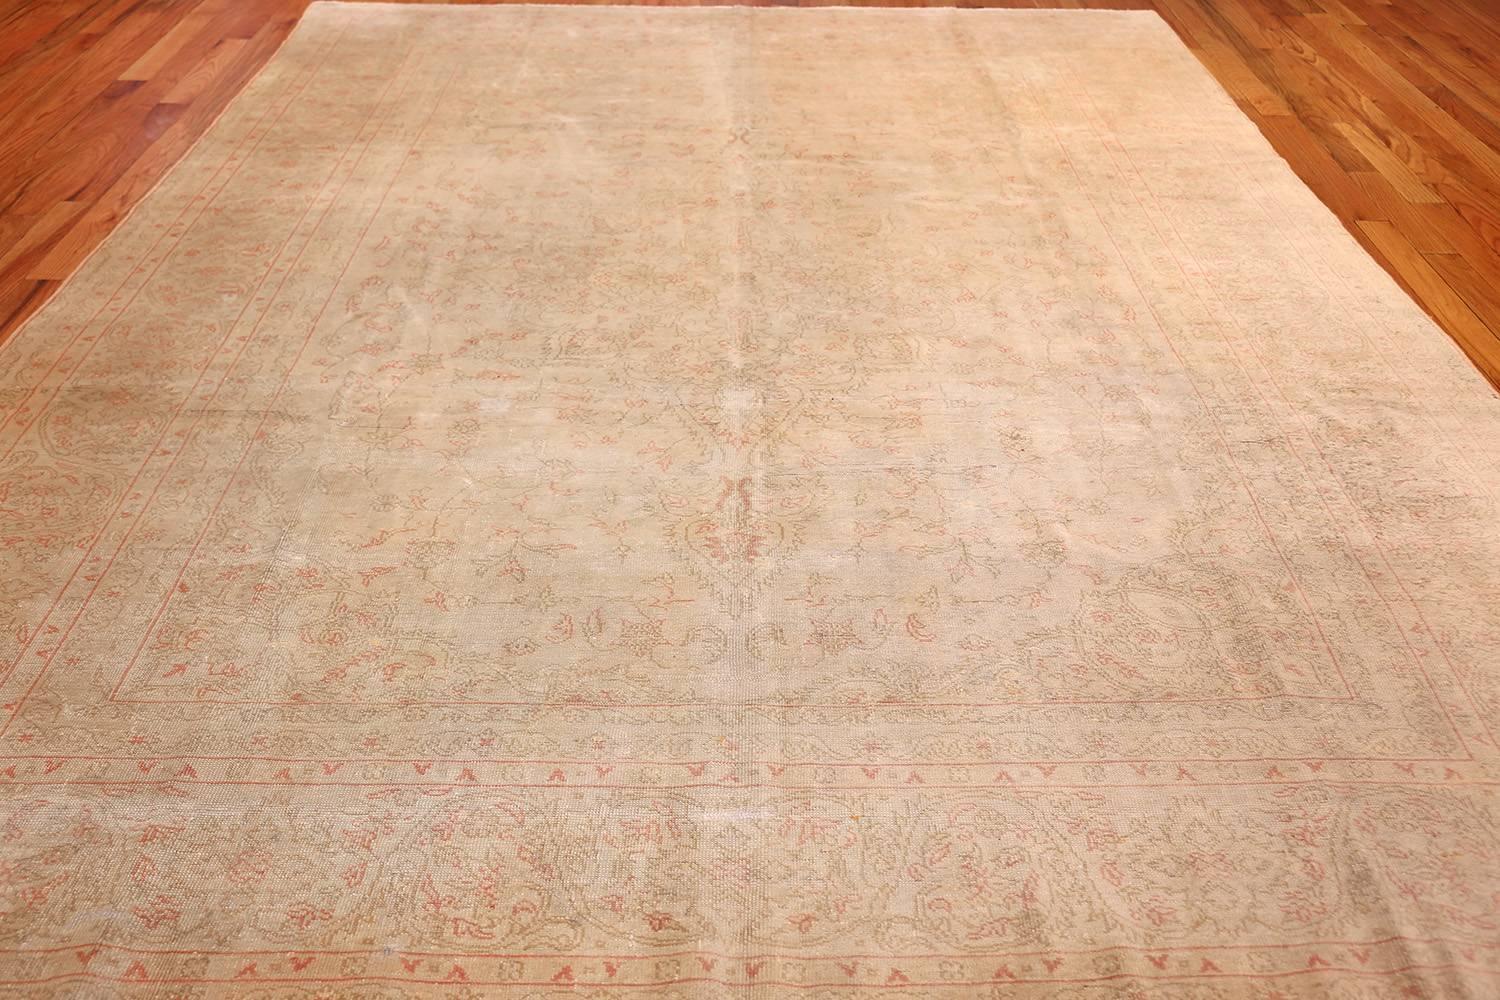 Antique Turkish Oushak rugs have been woven in Western Turkey since the beginning of the Ottoman period. Historians attributed to them many of the great masterpieces of early Turkish carpet weaving from the 15th-17th centuries. However, less is